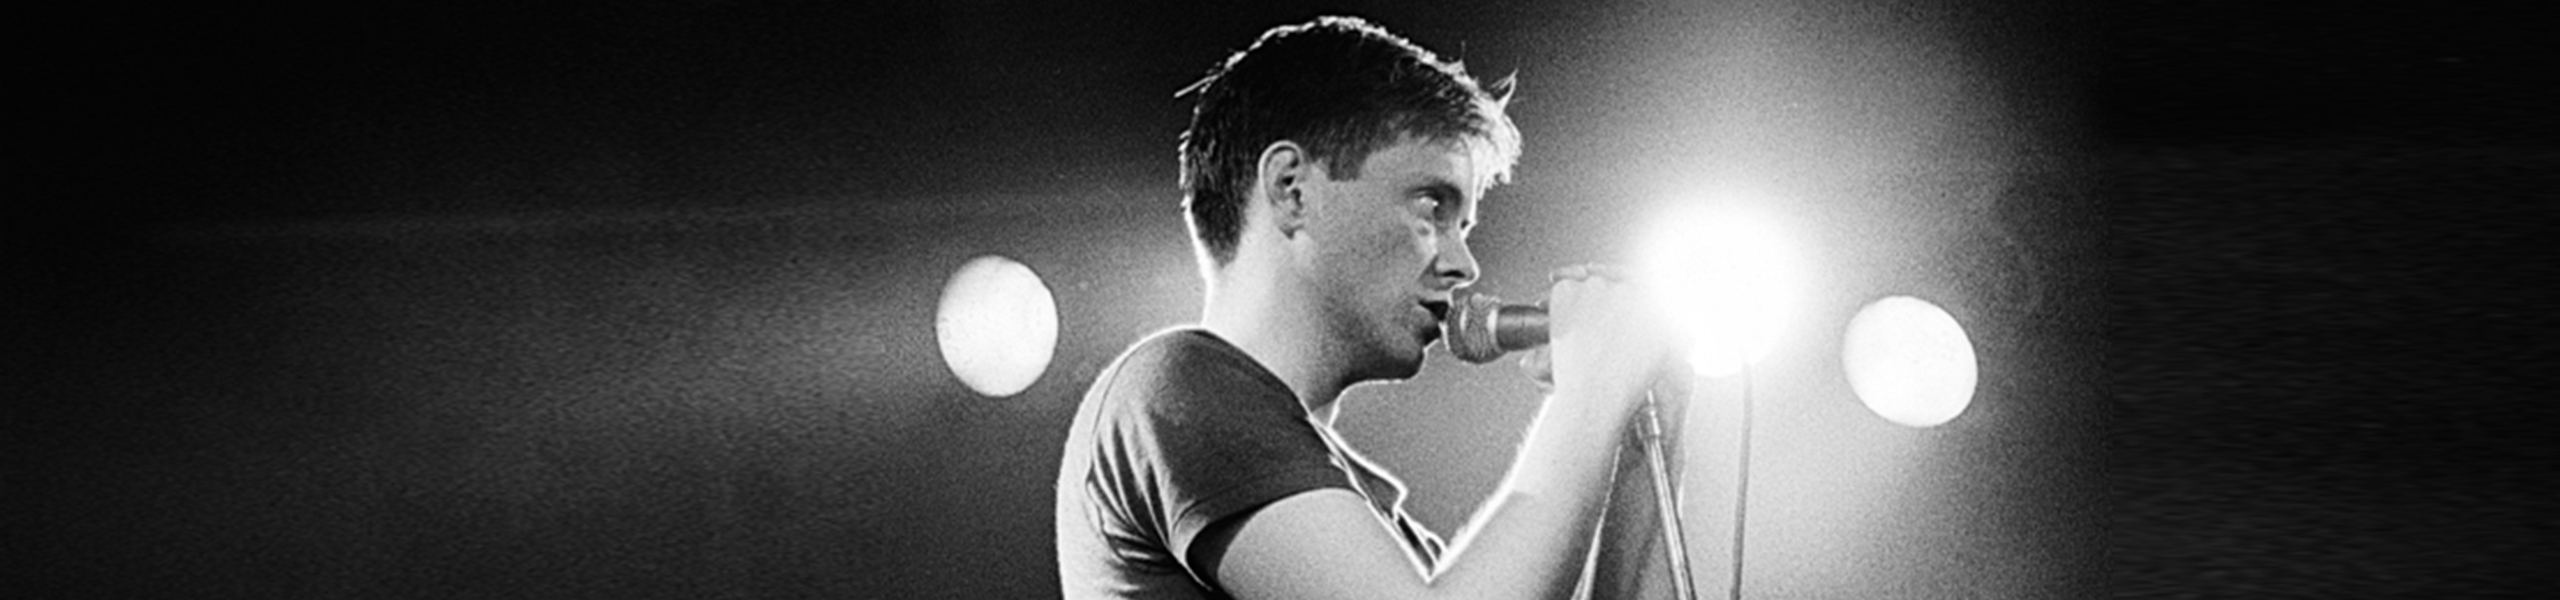 The-Rise-and-Influence-of-Joy-Division-Echoes-That-Still-Resonate_header2.jpg